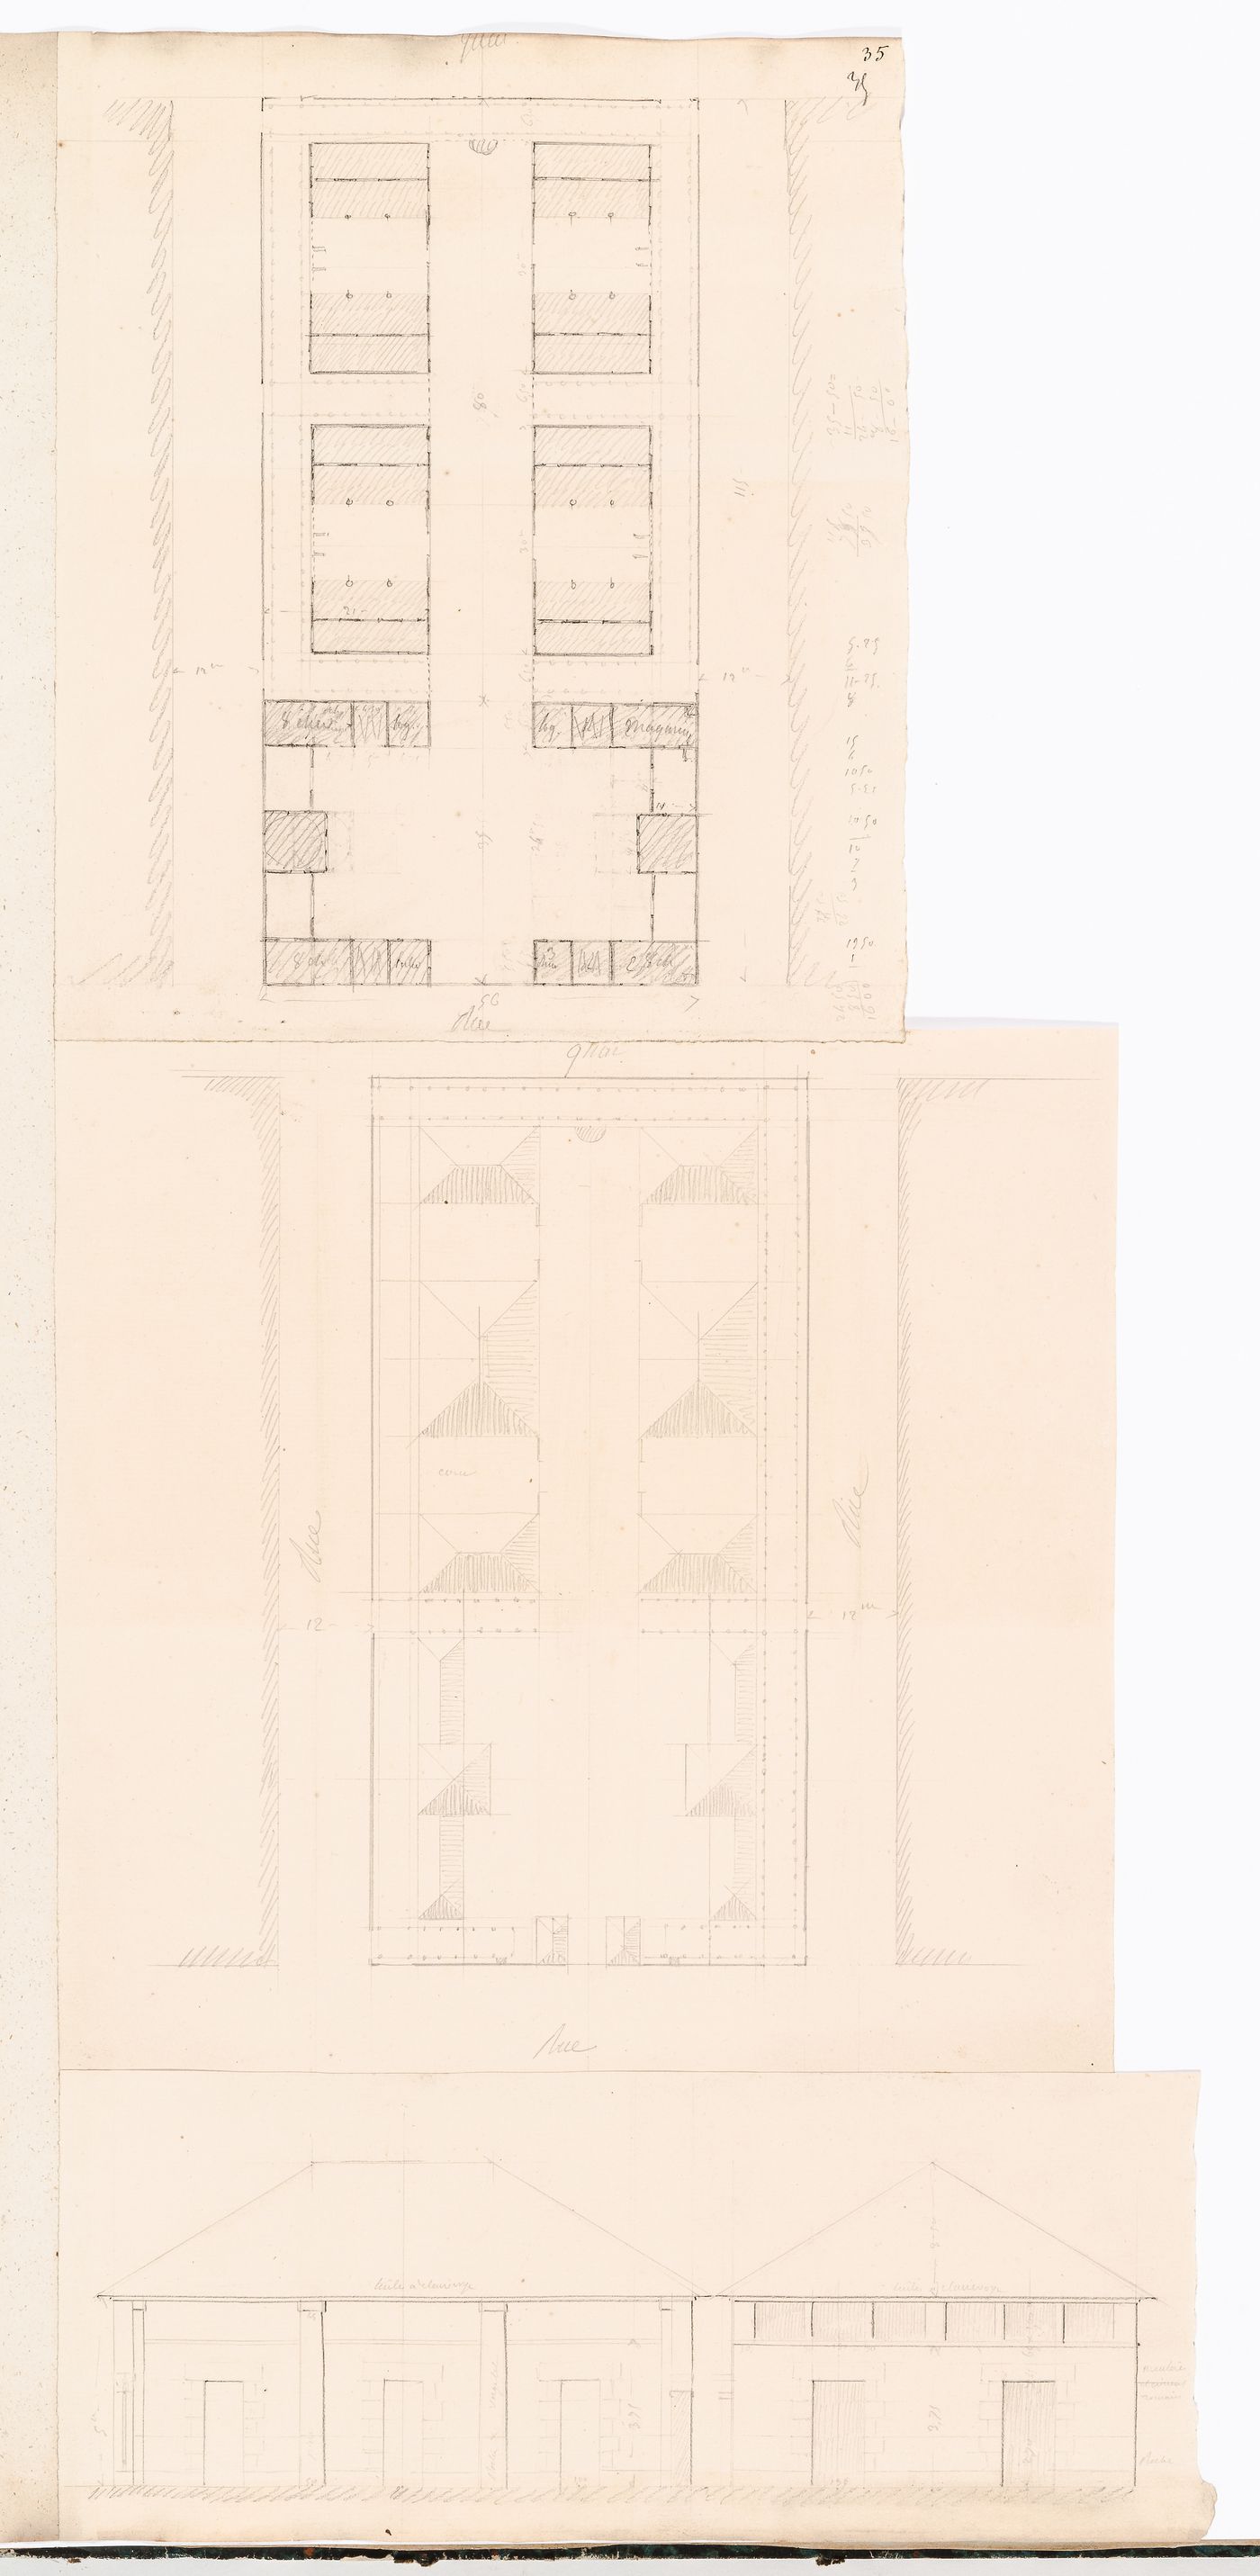 Project for a horse slaughterhouse, Plaine de Grenelle: Elevations for two unidentified buildings